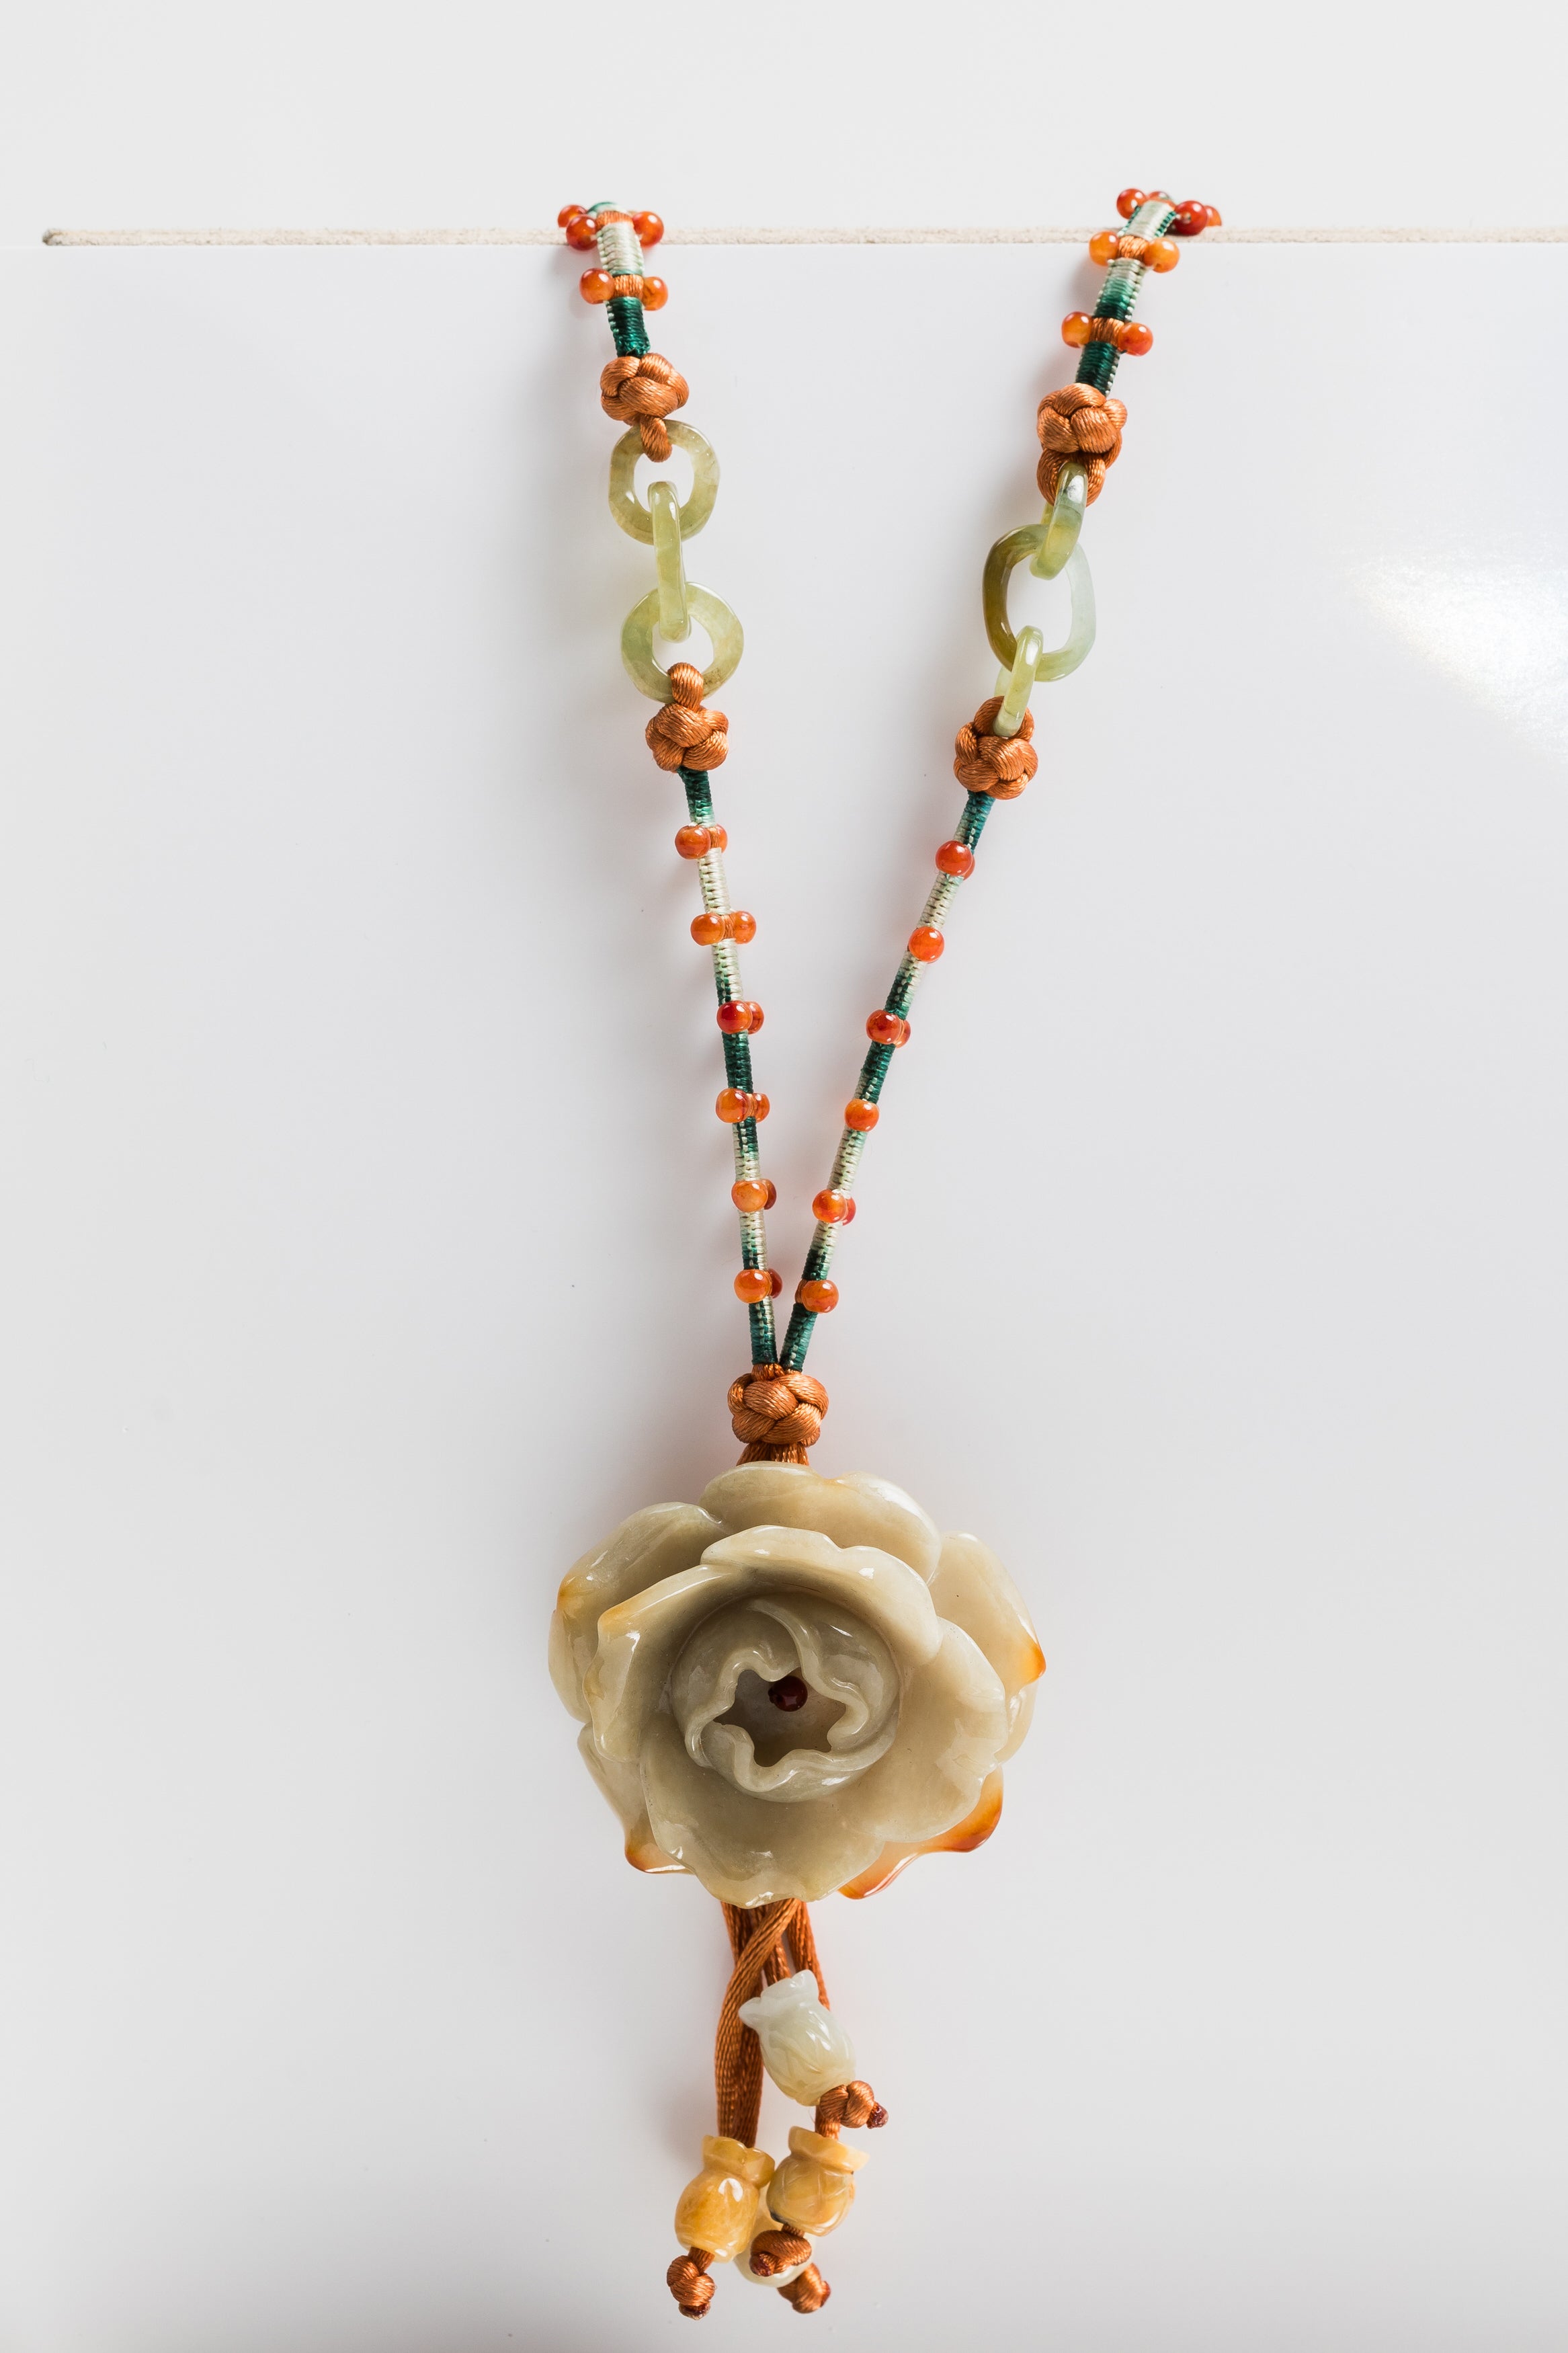 Glass Rose with Tassles Pendant Necklace